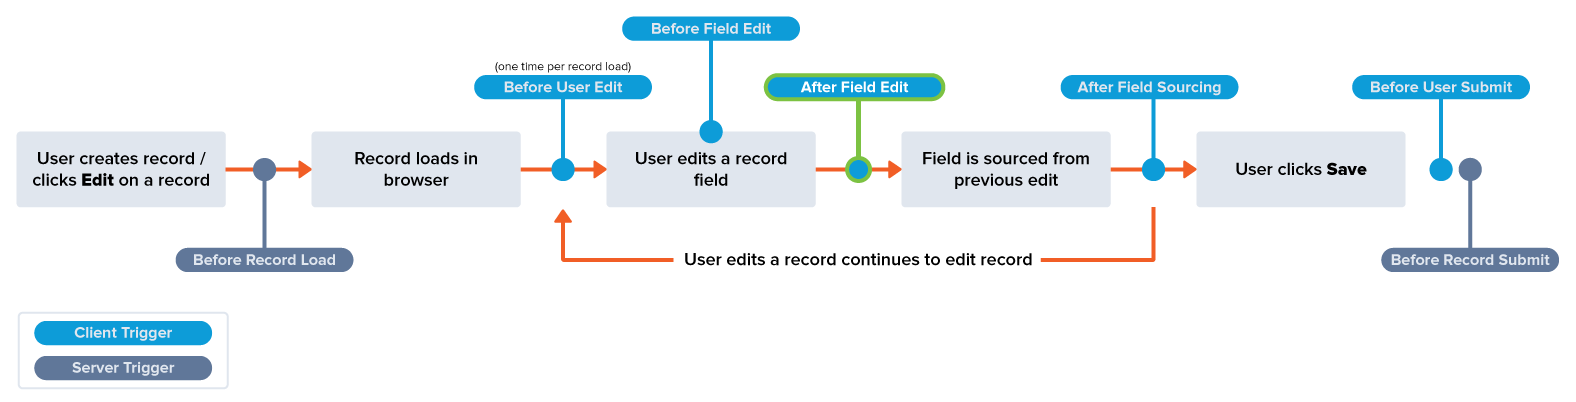 A diagram showing common record edit events and when the After Field Edit trigger executes.